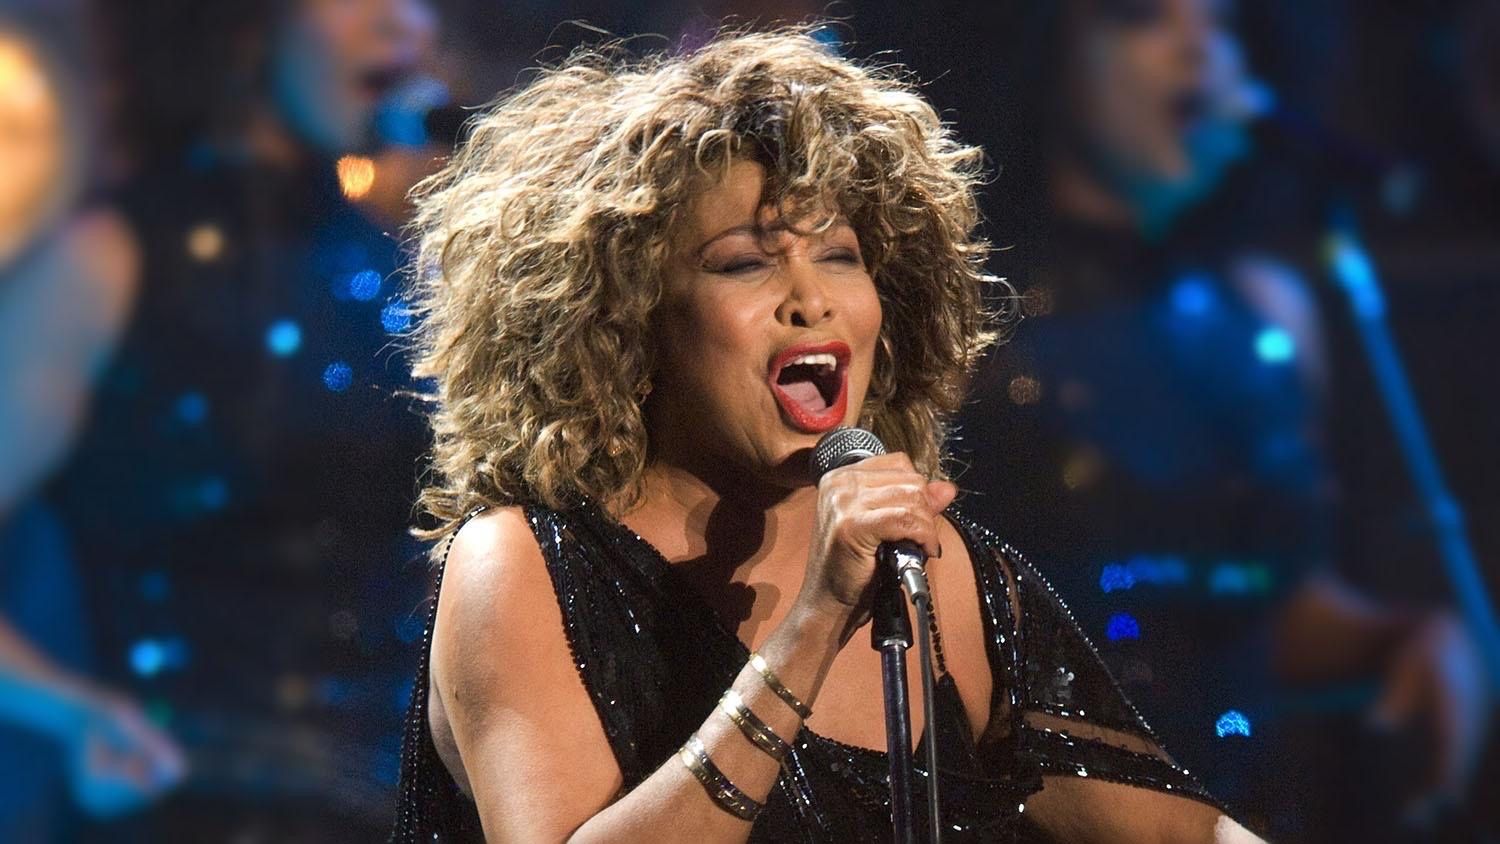 Who is Tina Turner? Age, family, and net worth